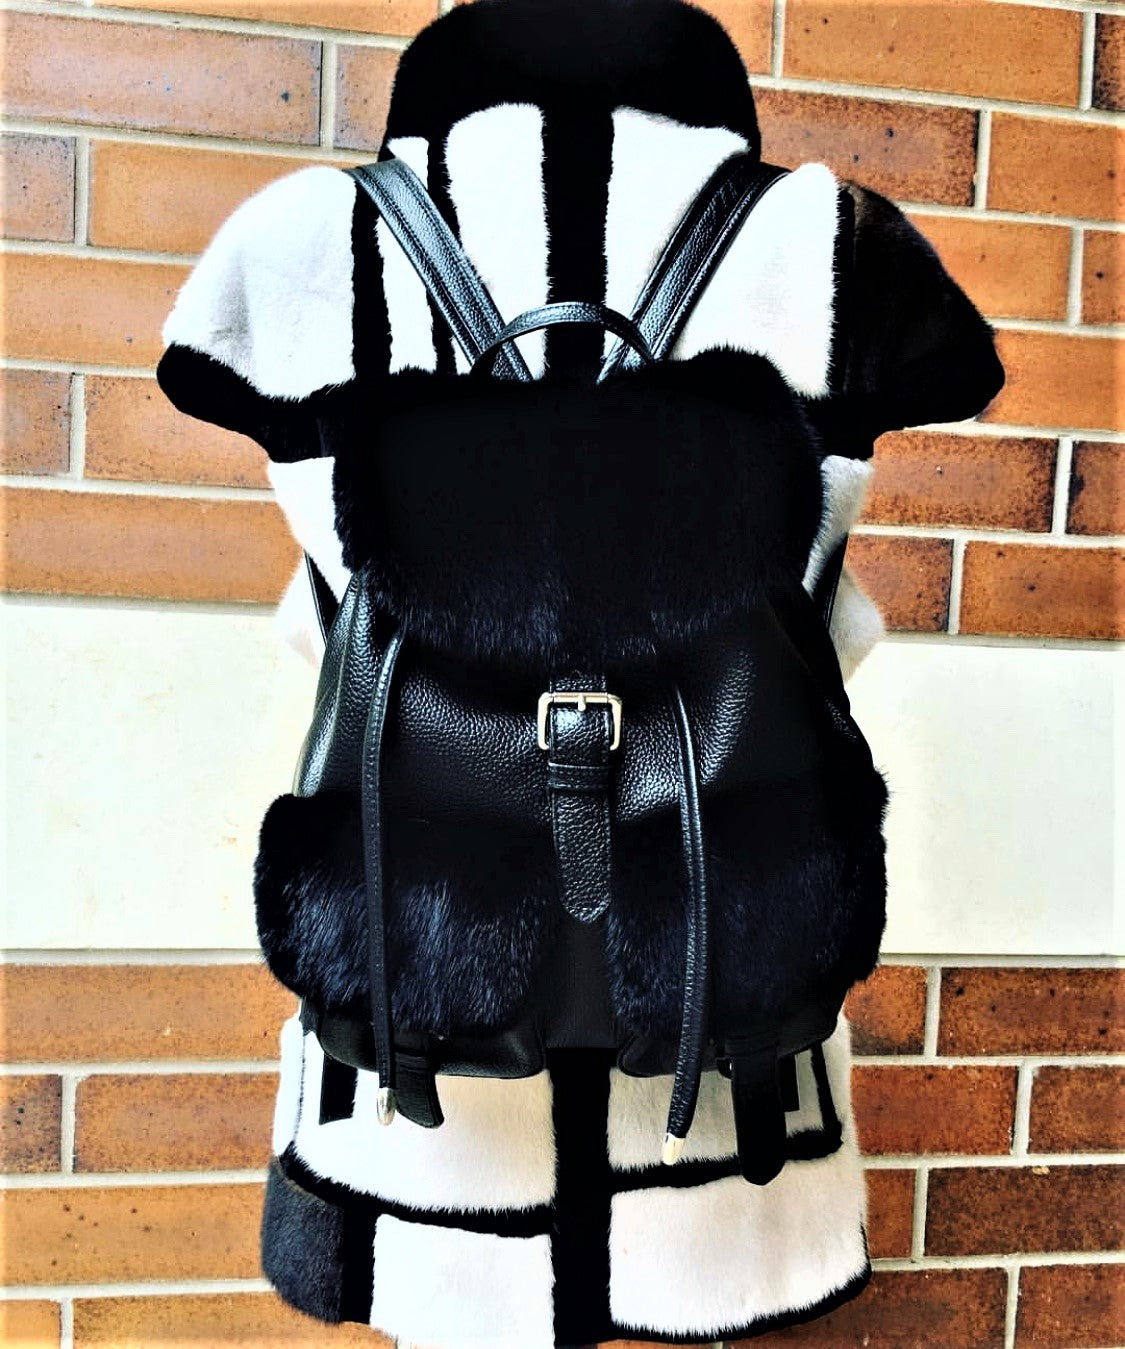 Black Mink and Leather Backpack Purse - paulamariecollection